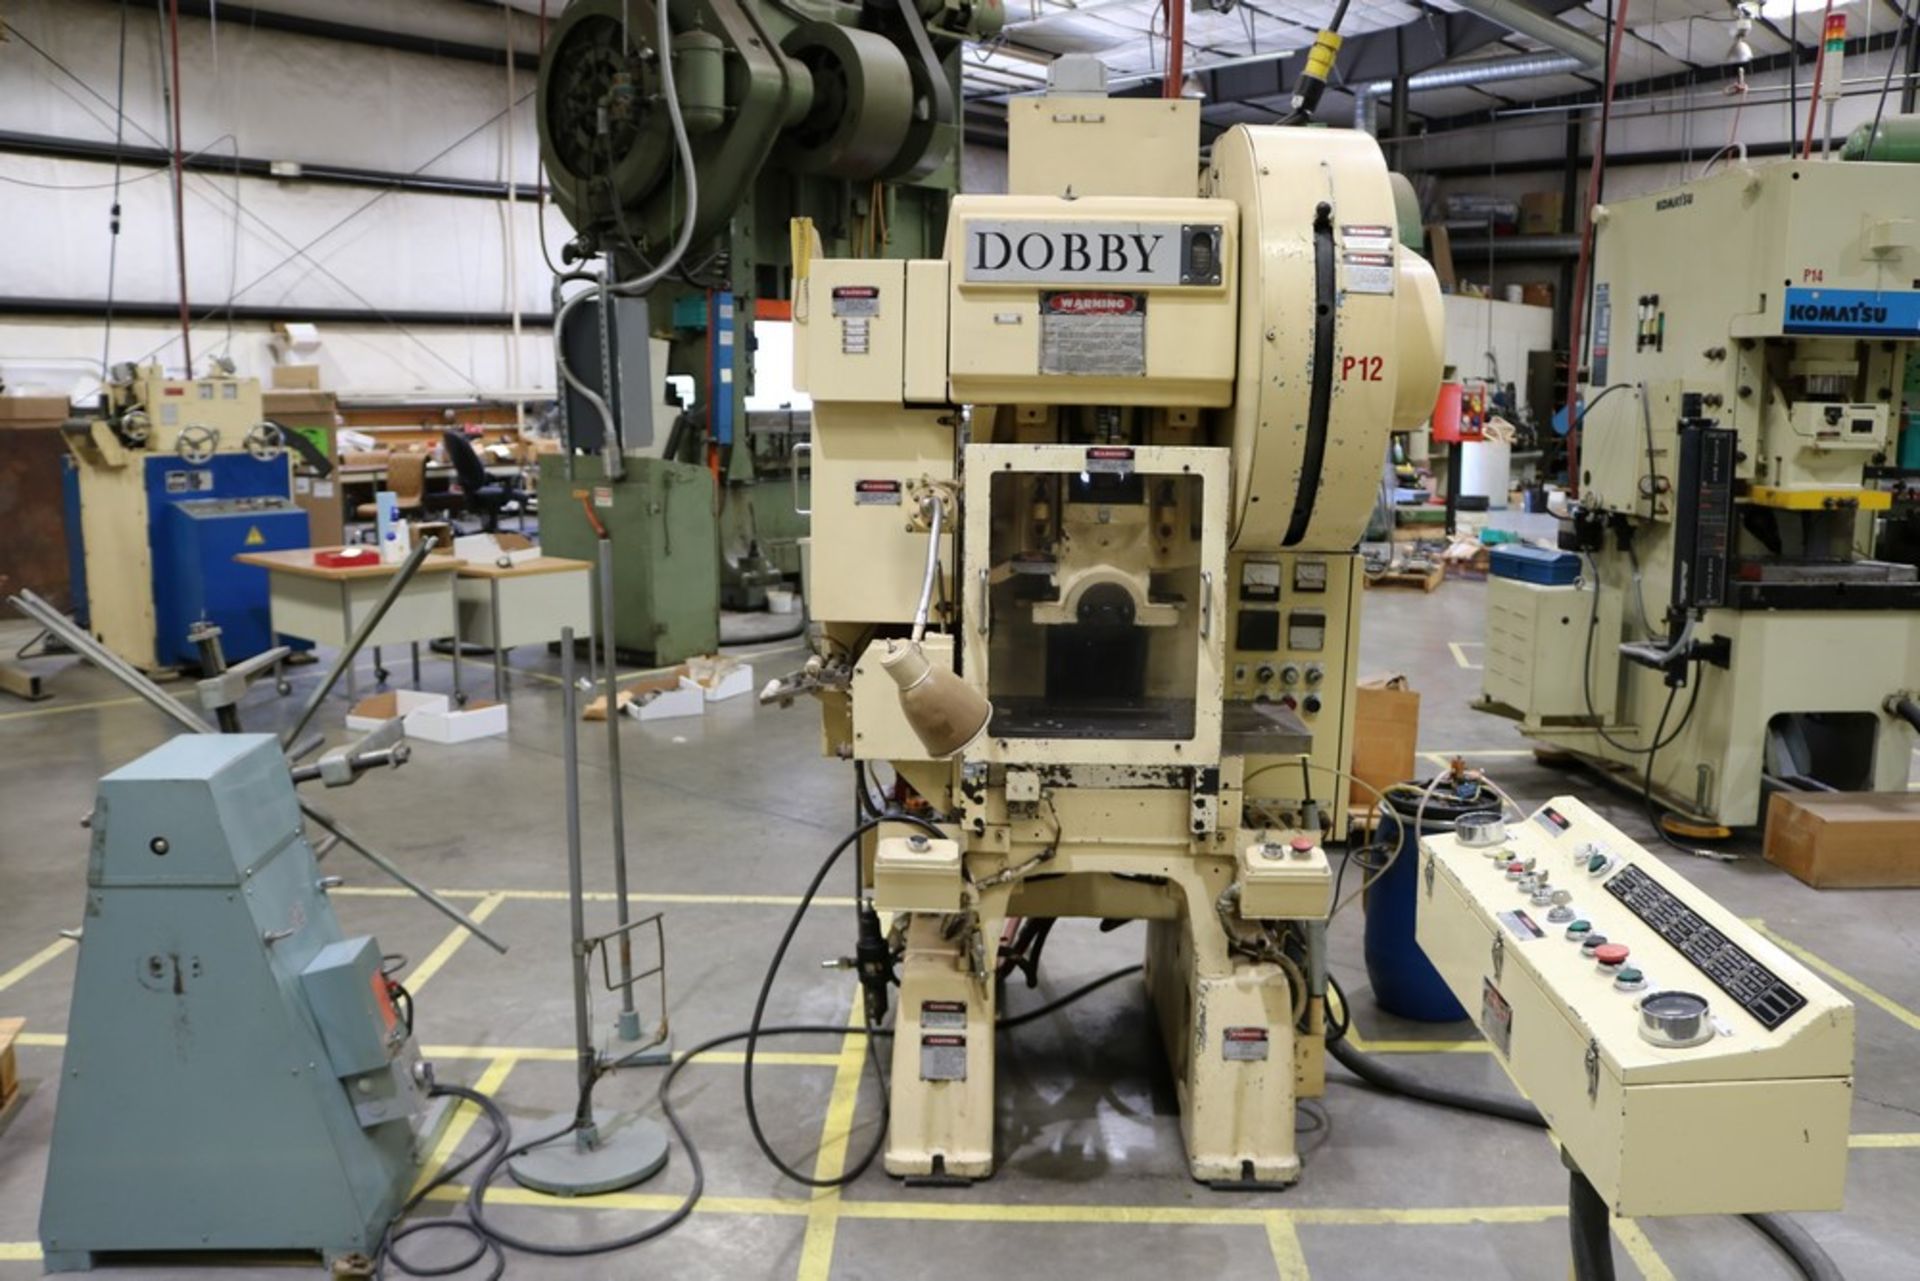 1987 Dobby, Model 30020, 20 Ton HiPro-Power Punch Press, Air Clutch, Variable Speed 70-200 with